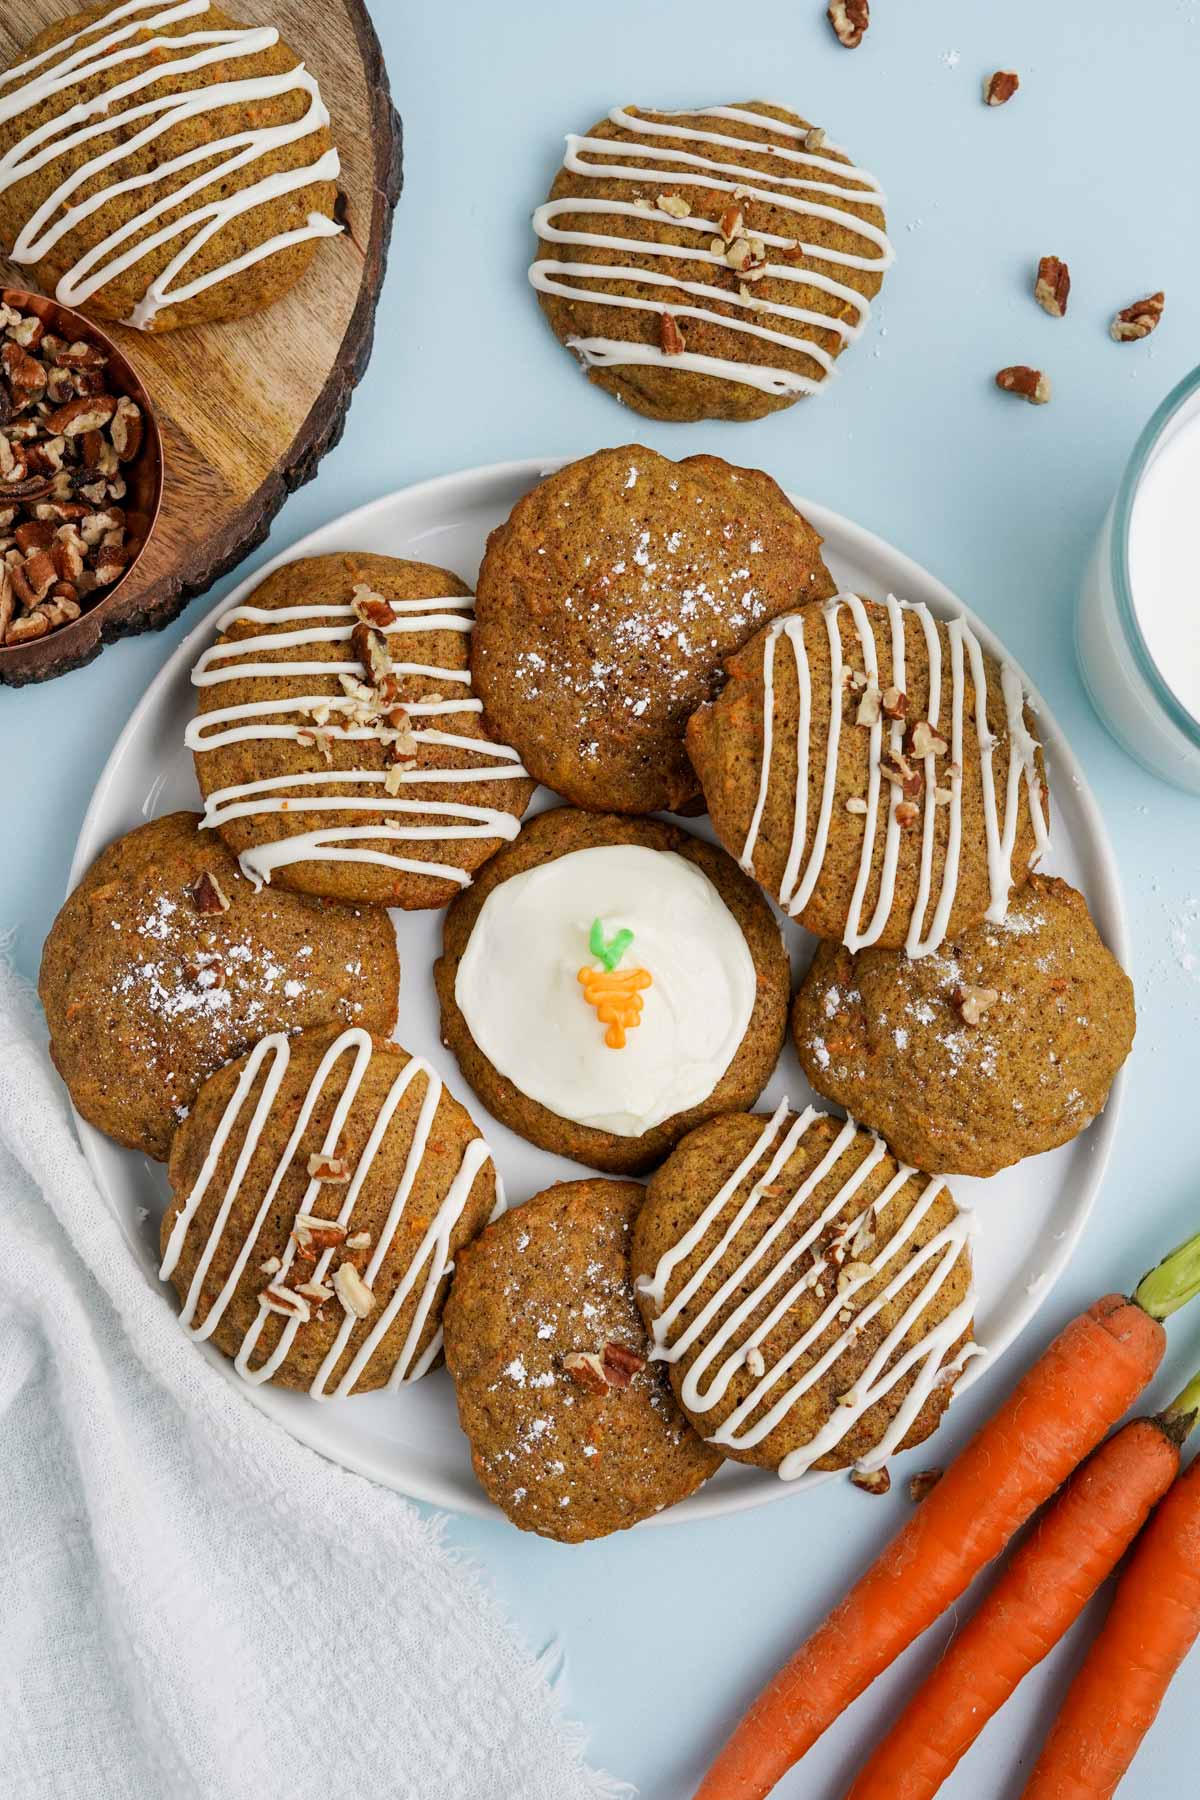 Carrot cake cookies on a plate some with icing on top and others with icing drizzle.